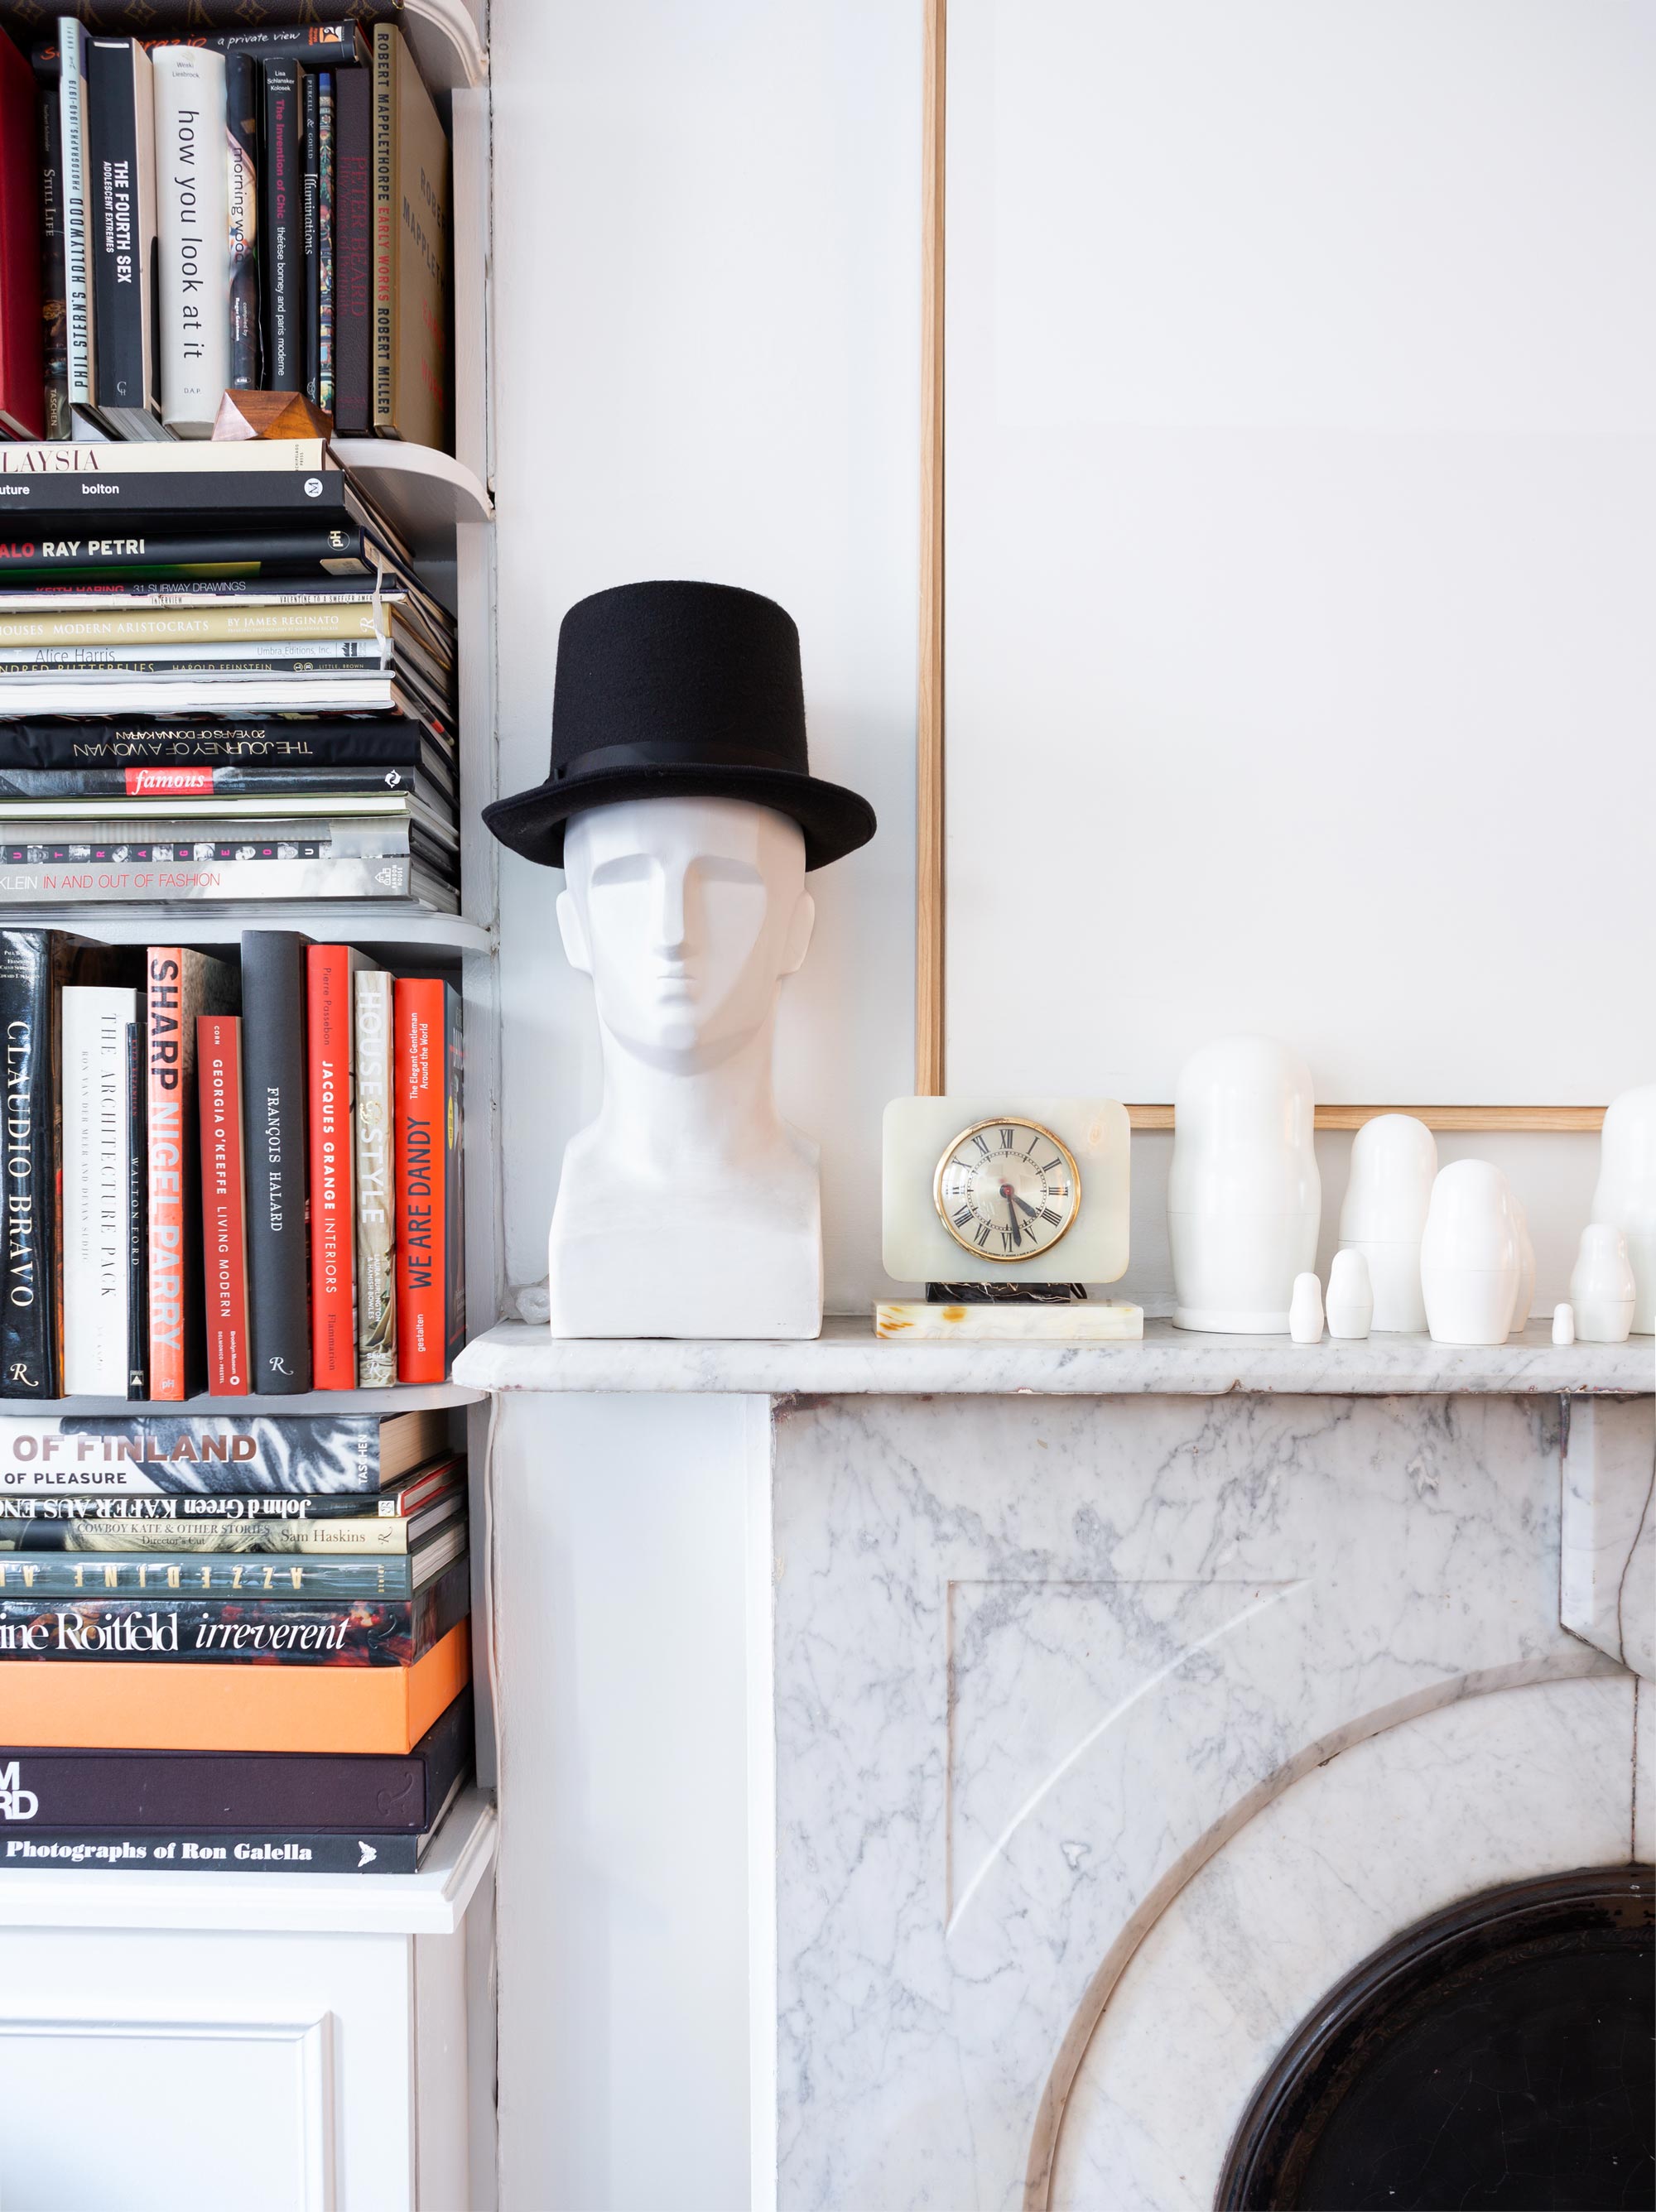 A grave-looking modernist bust in a top hat? “It’s about taking something deep that’s fraught with meaning and emotion, and then offsetting it with something completely silly and funny,” Teo explains.